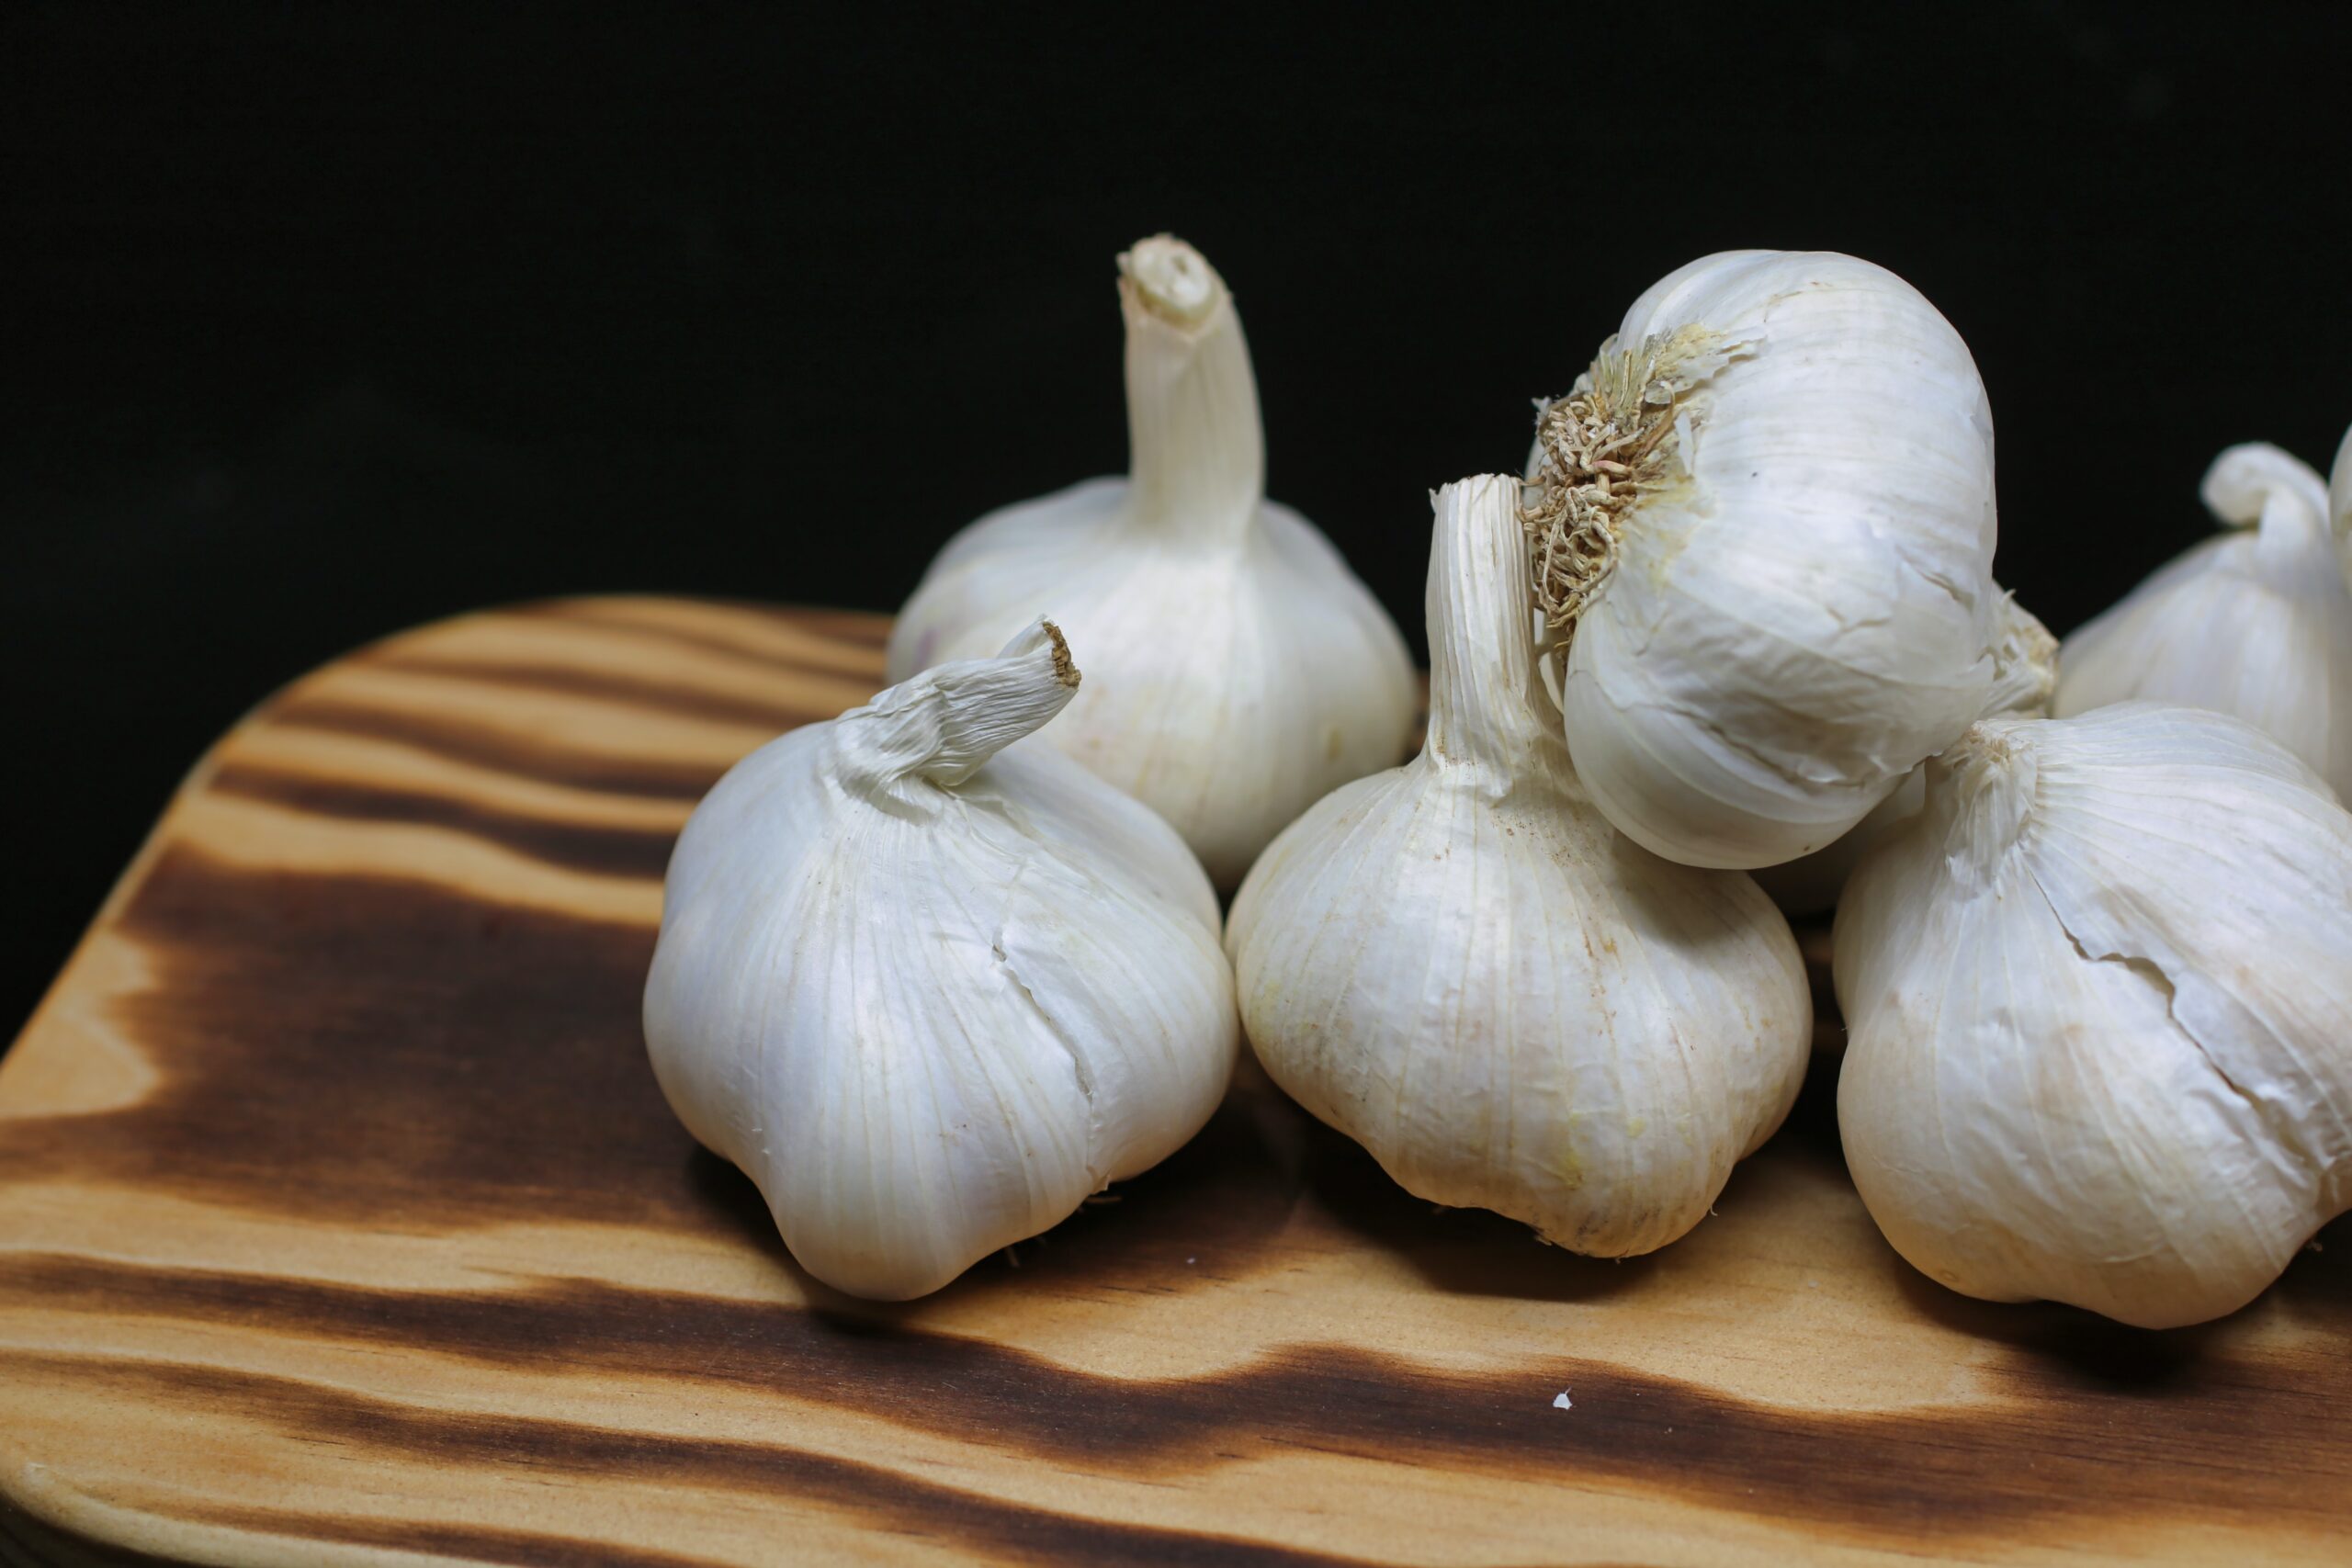 Garlic: A Superfood for Heart Health